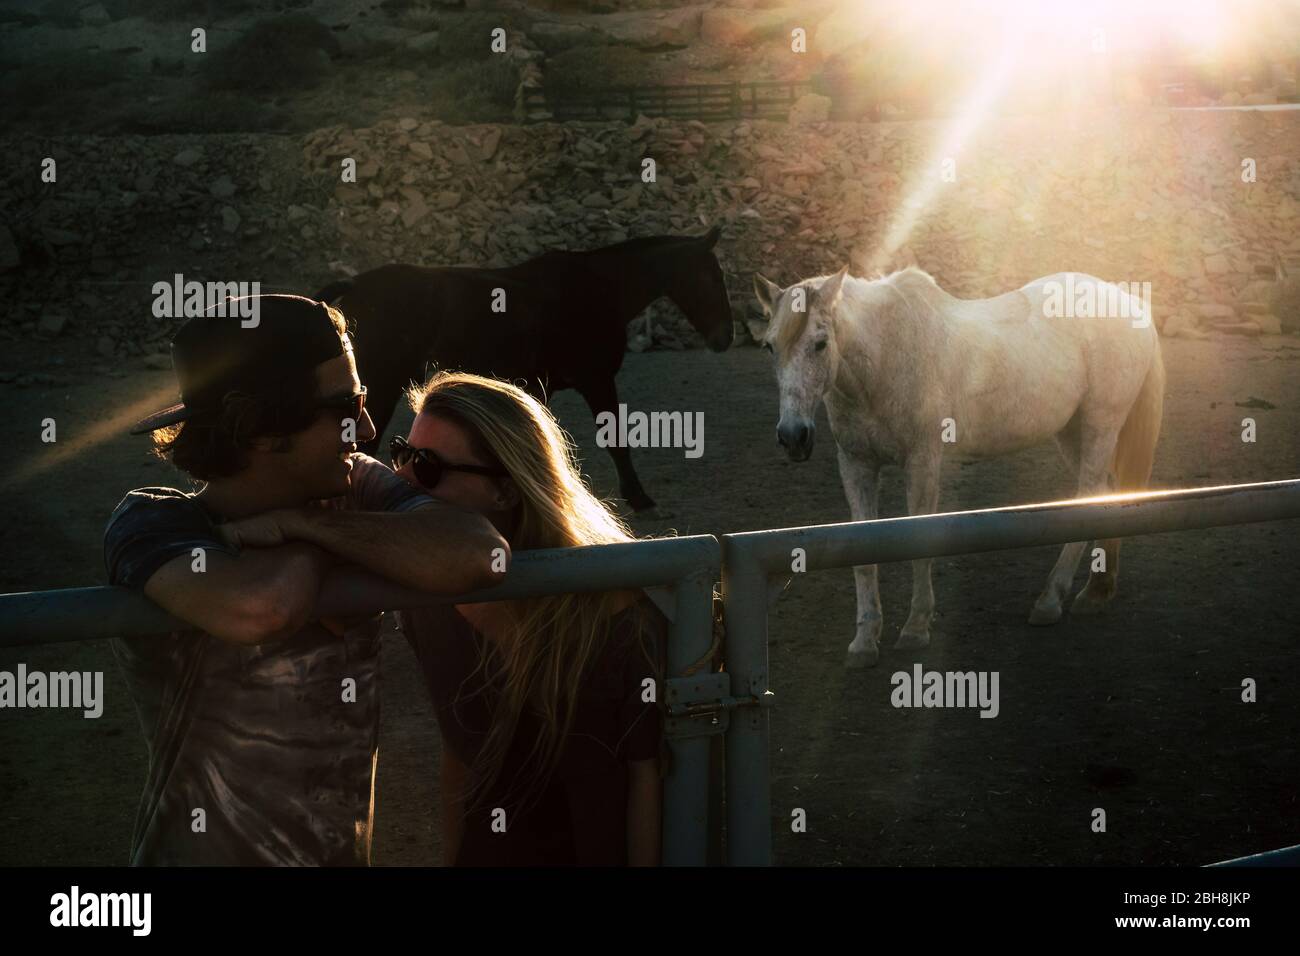 Romantic light and couple whispering together with love during the sunset with two beautiful horse in the background - romance and relationship concept outdoor with sunlight Stock Photo